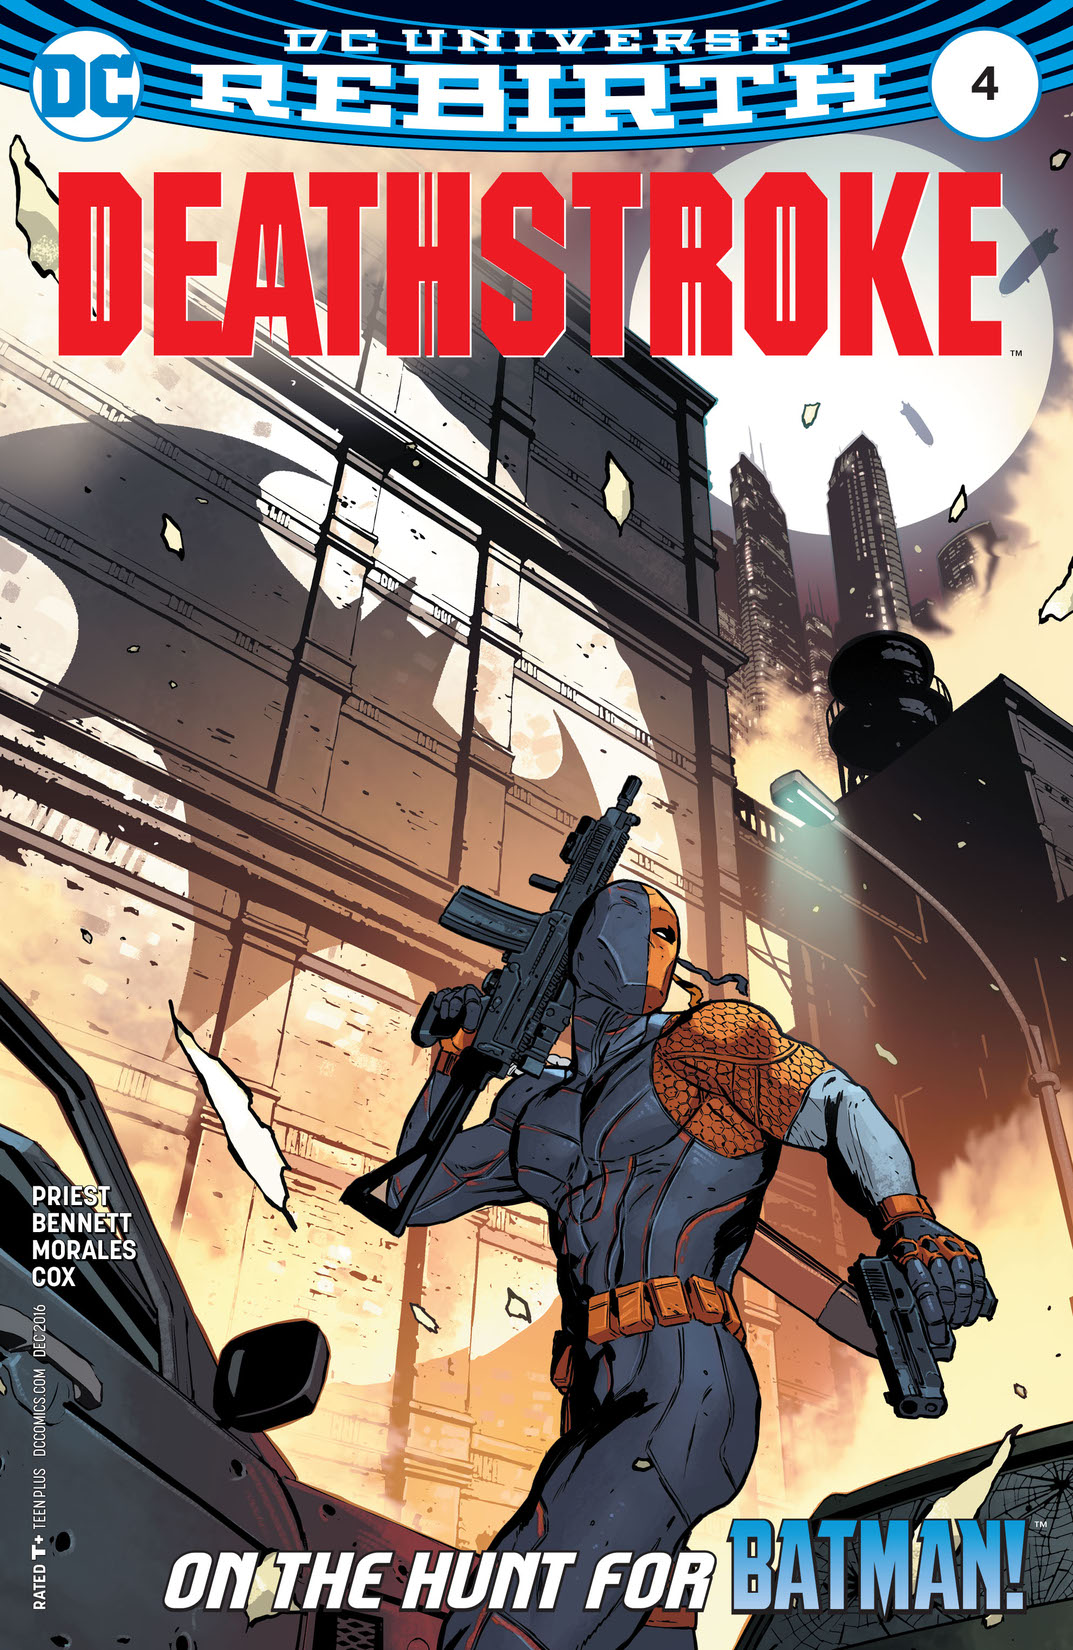 Deathstroke (2016-) #4 preview images